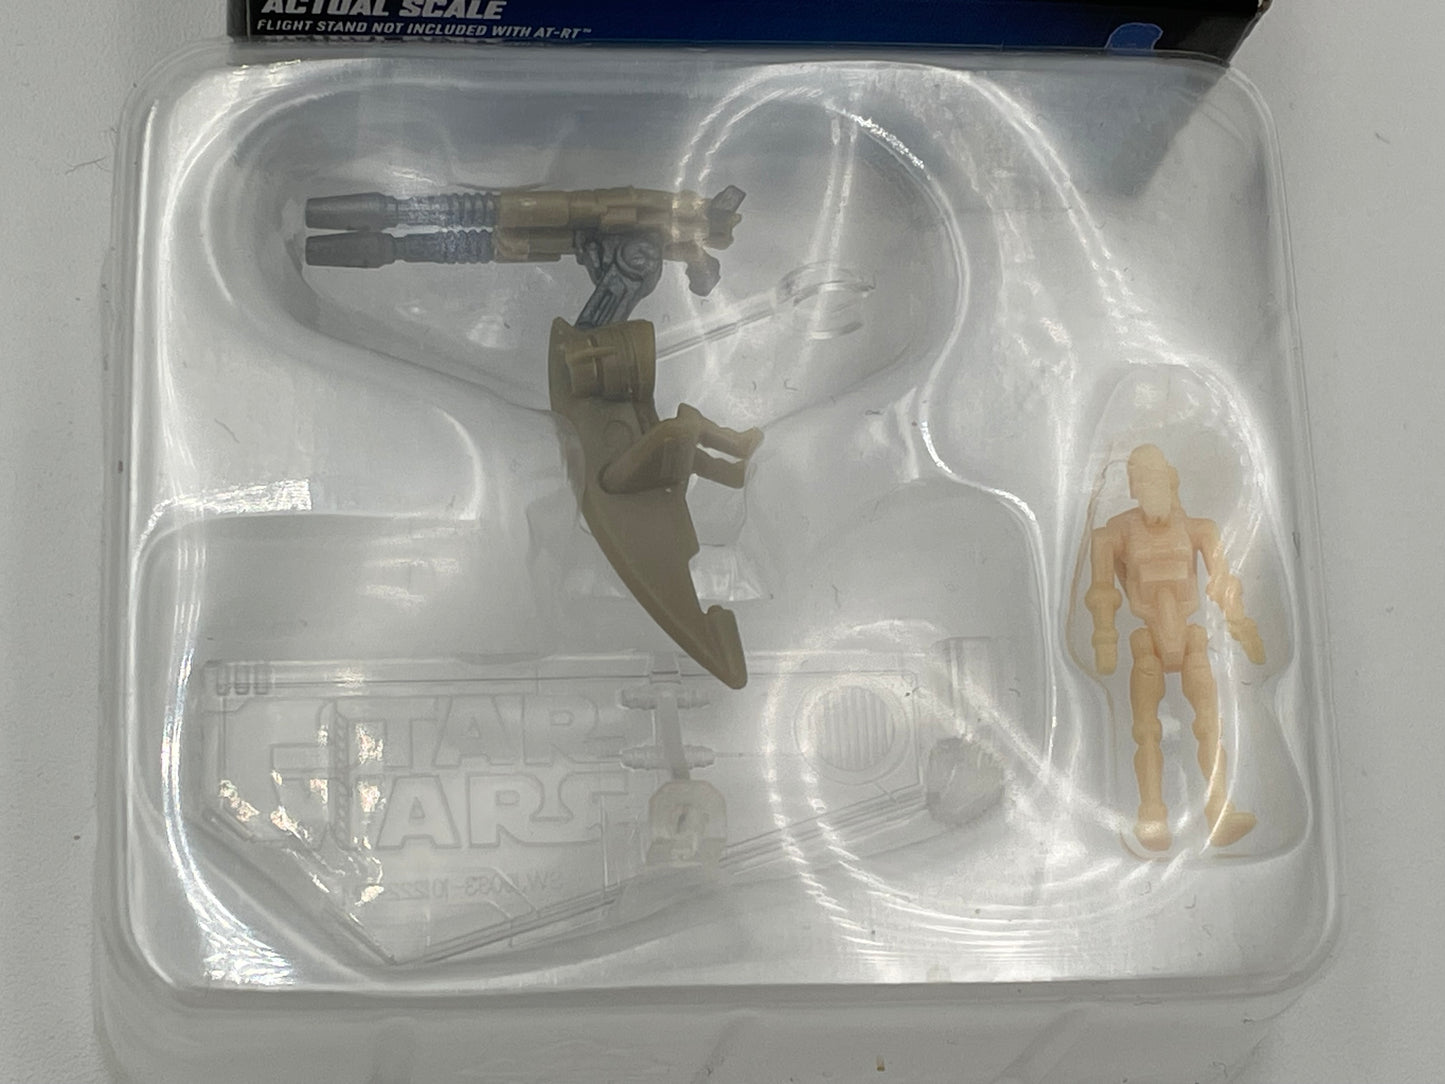 Star Wars - Micro Galaxy Squadron - Mystery Pack - Battle Droid 2022 #102453